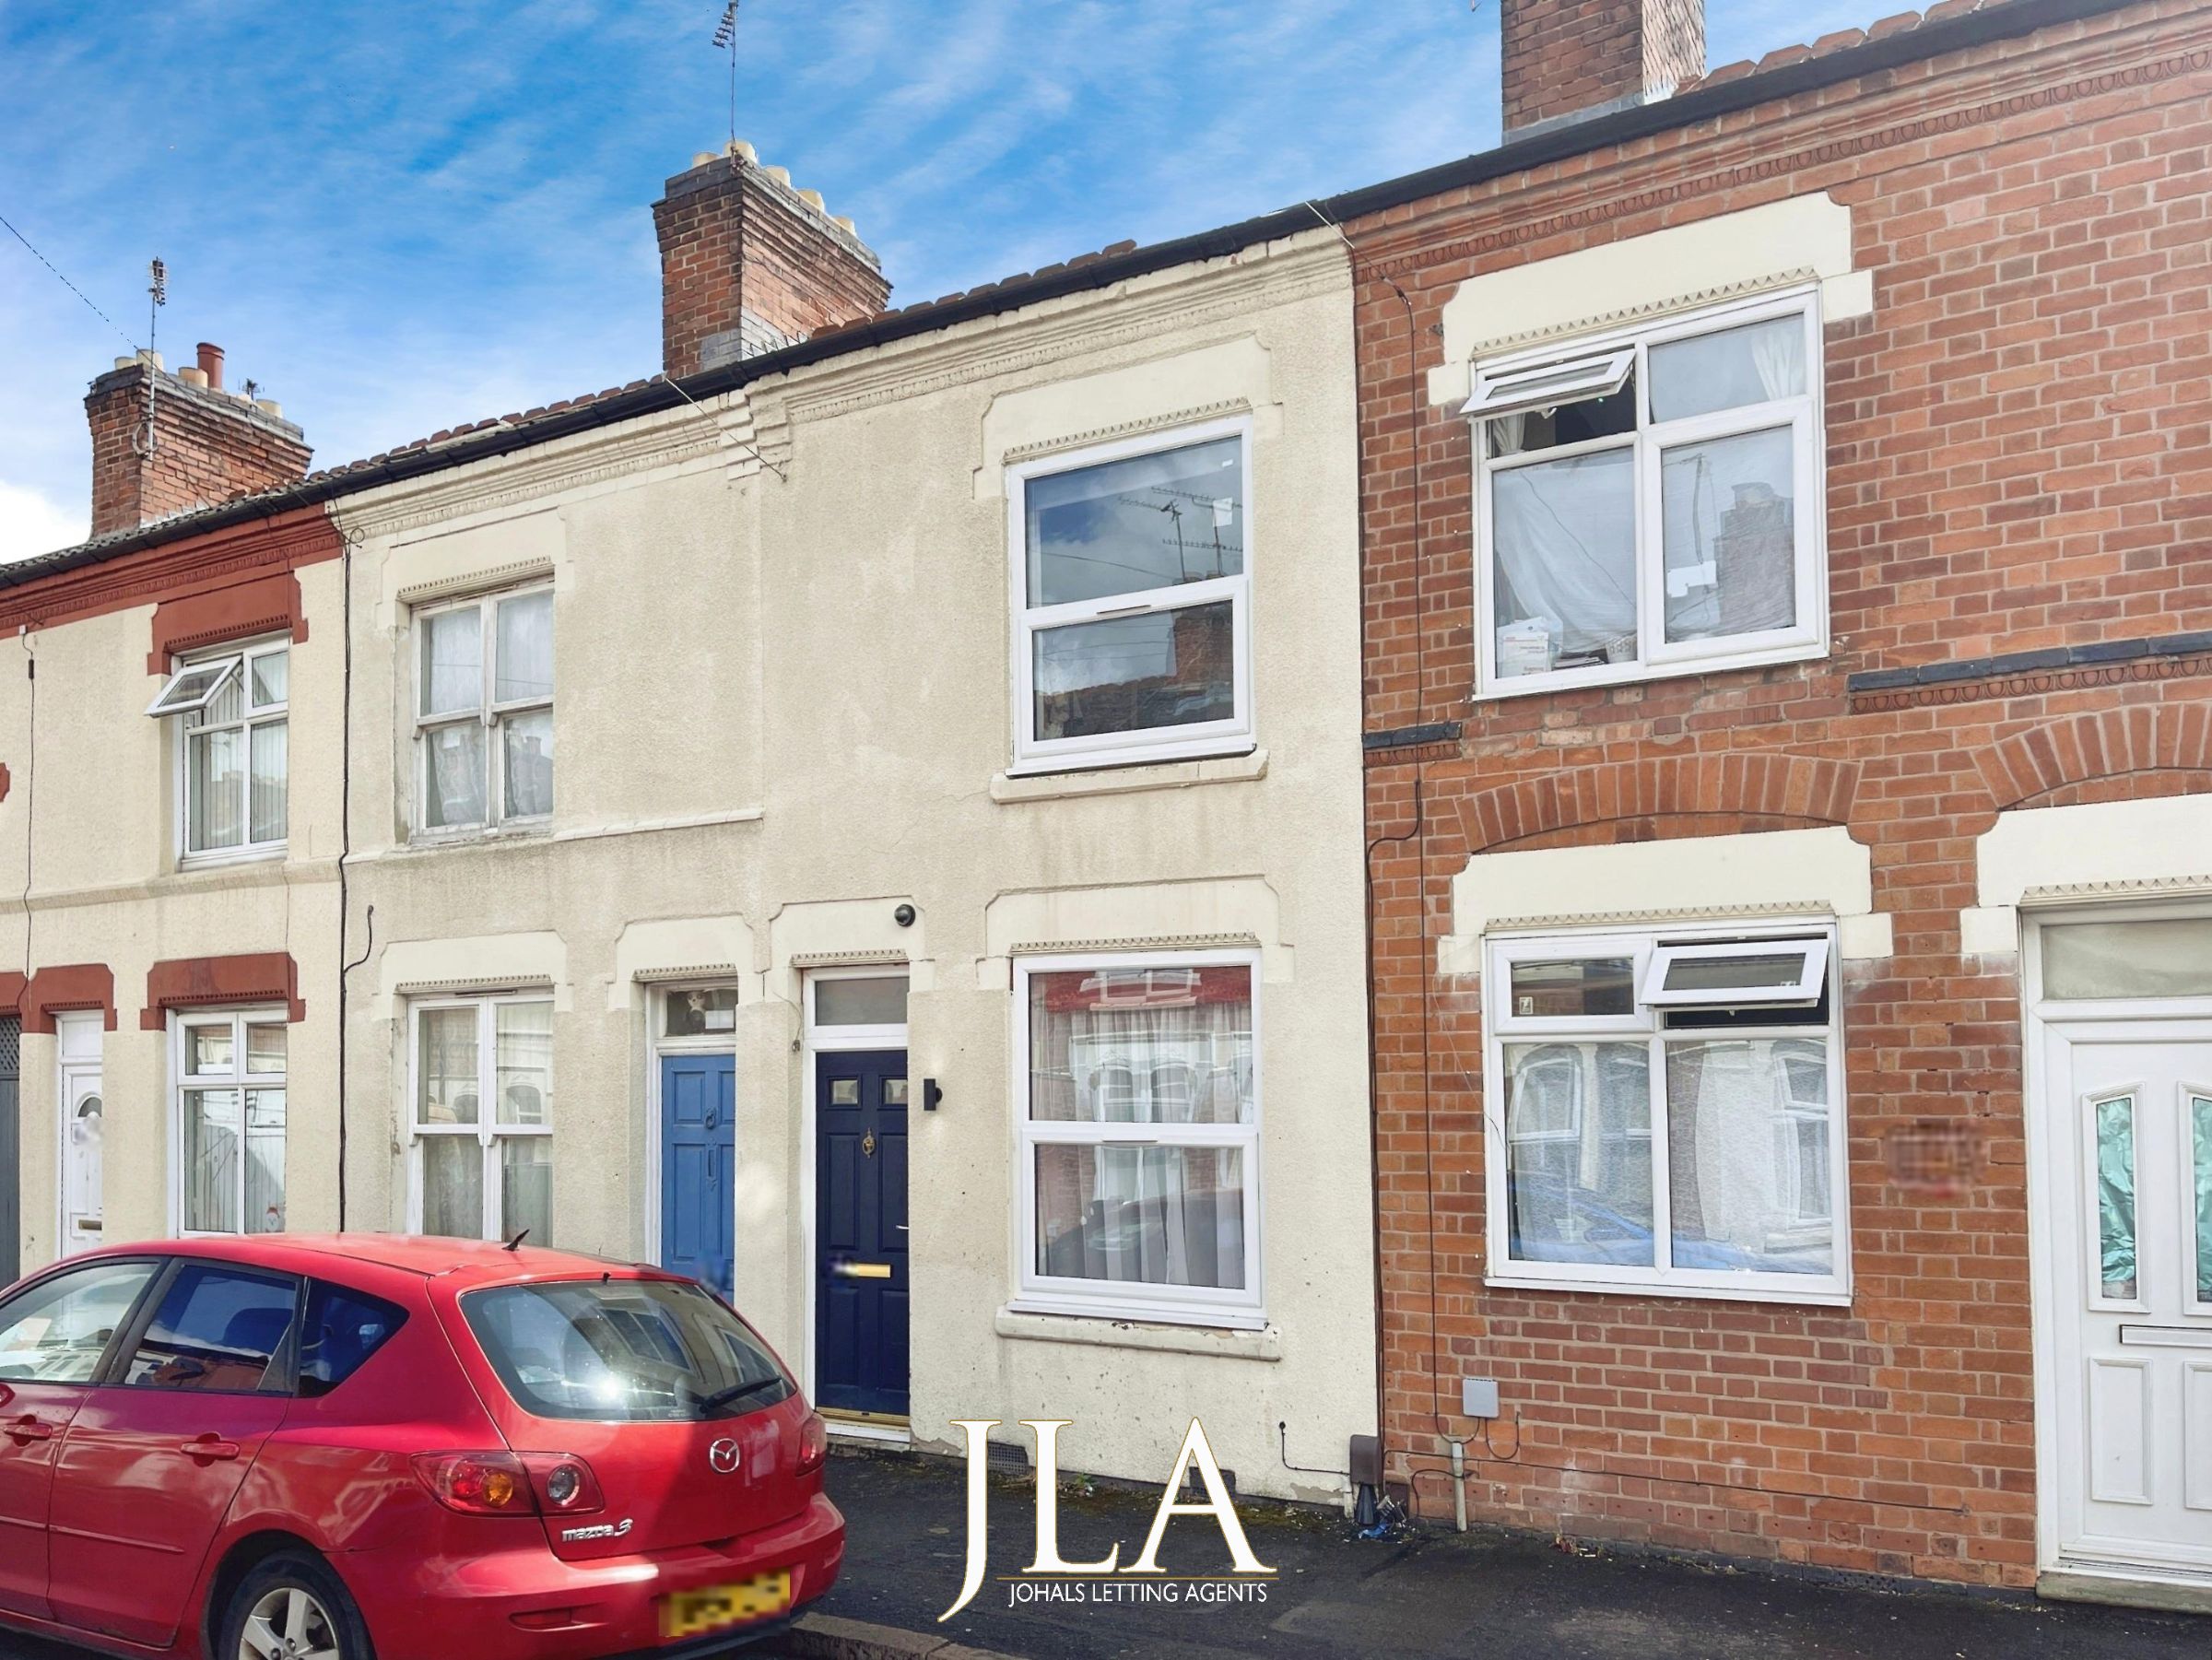 4 bed terraced house to rent in Luther Street, Leicester, LE3 